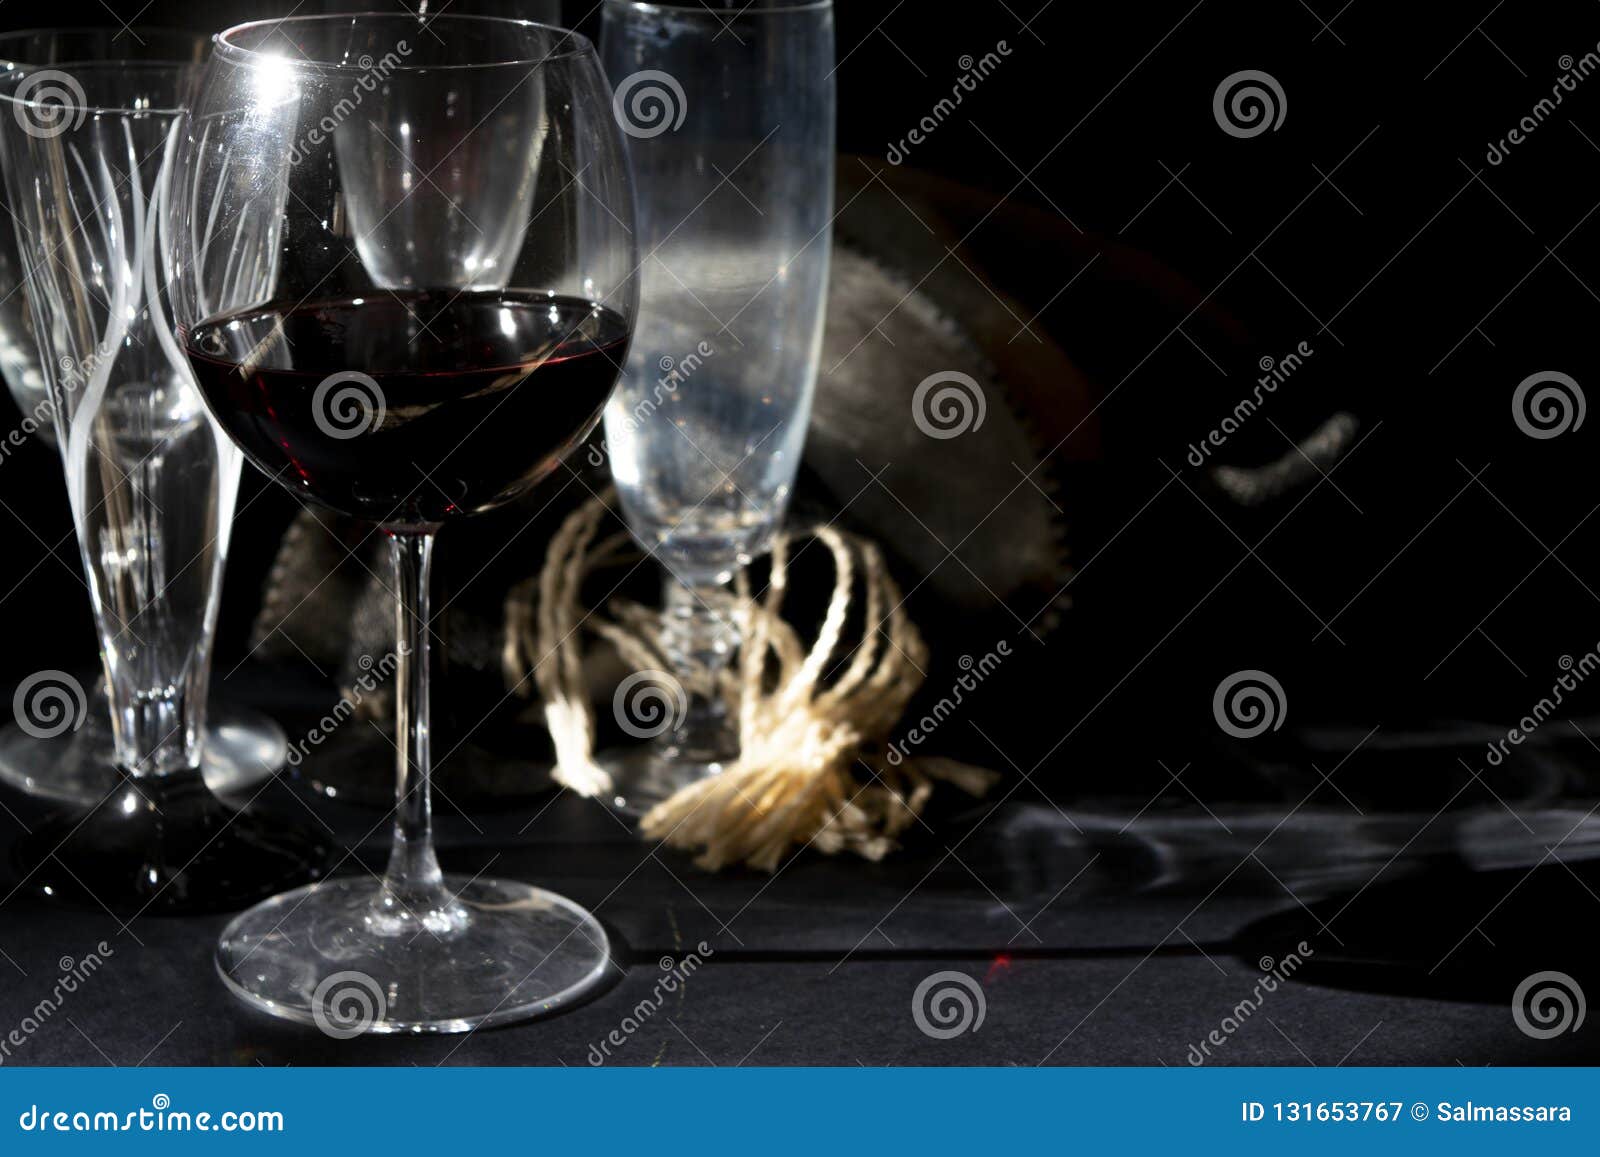 Wineglass of aged red wine stock image. Image of balloon - 131653767